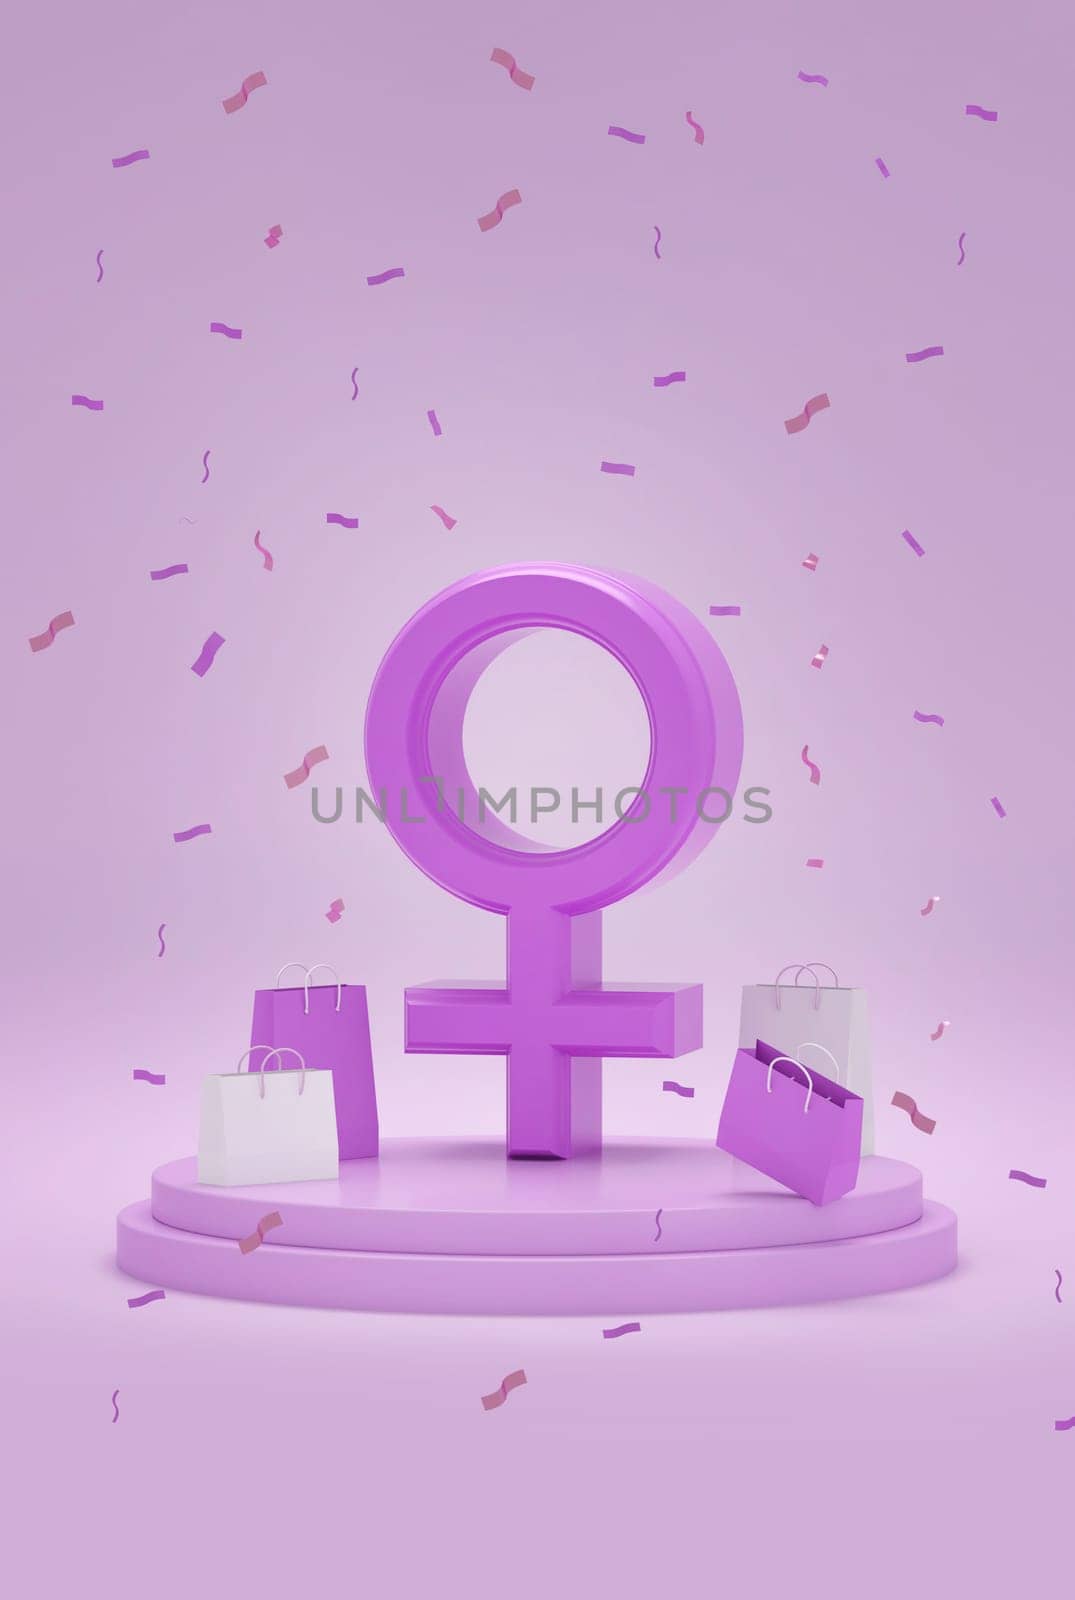 Female gender symbol with gift bags and confetti on podium. 3D illustration of gift shopping. by ImagesRouges